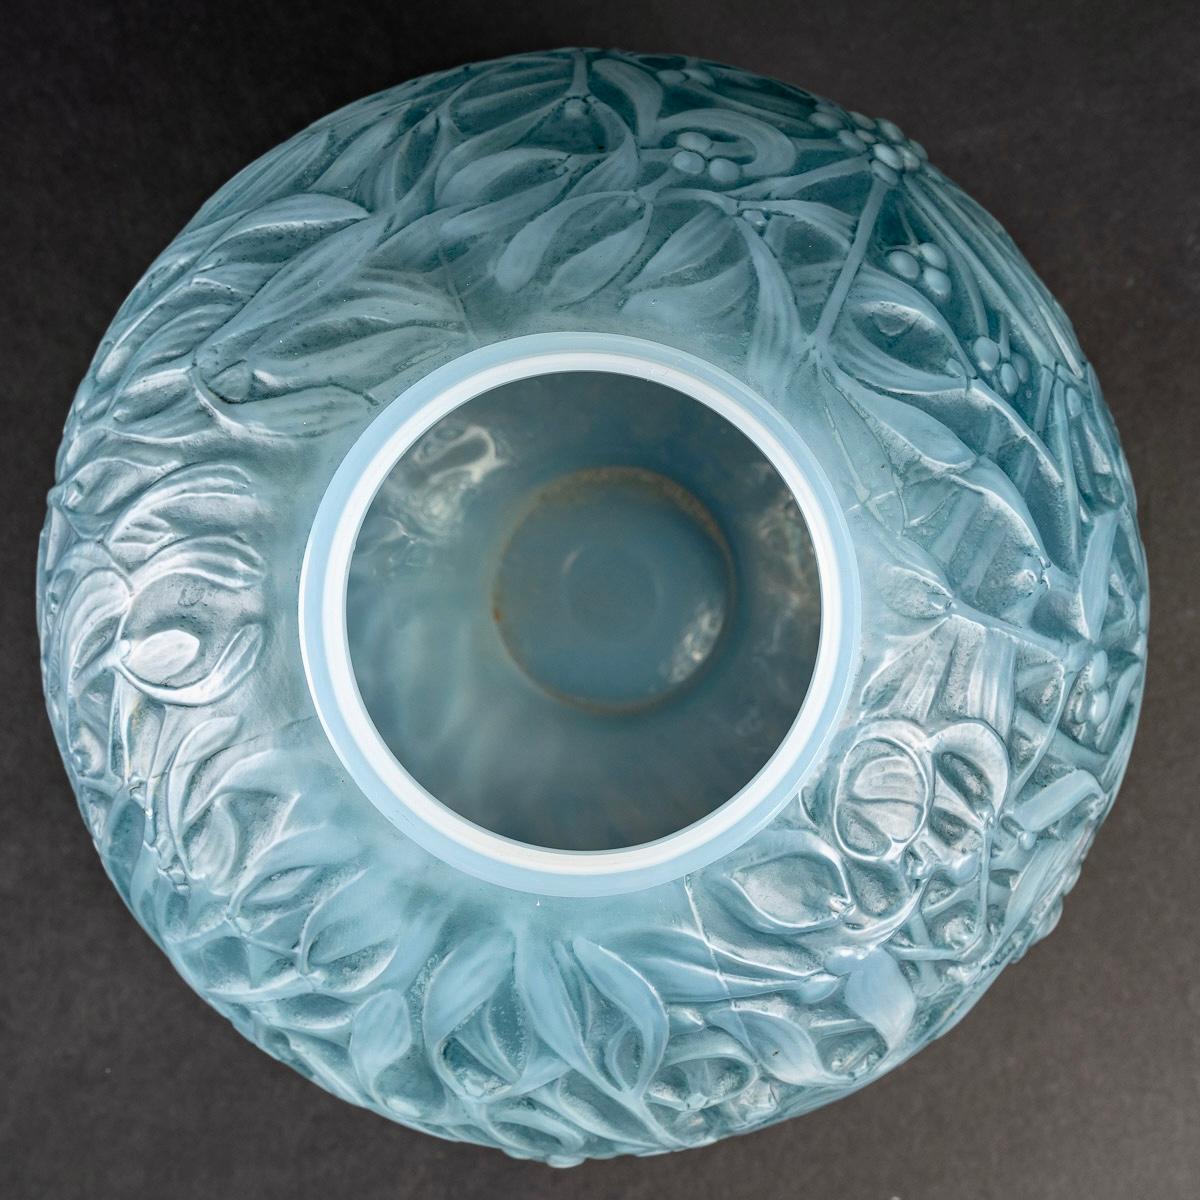 Molded 1920, René Lalique Vase Gui Double Cased Opalescent Glass with Blue Patina